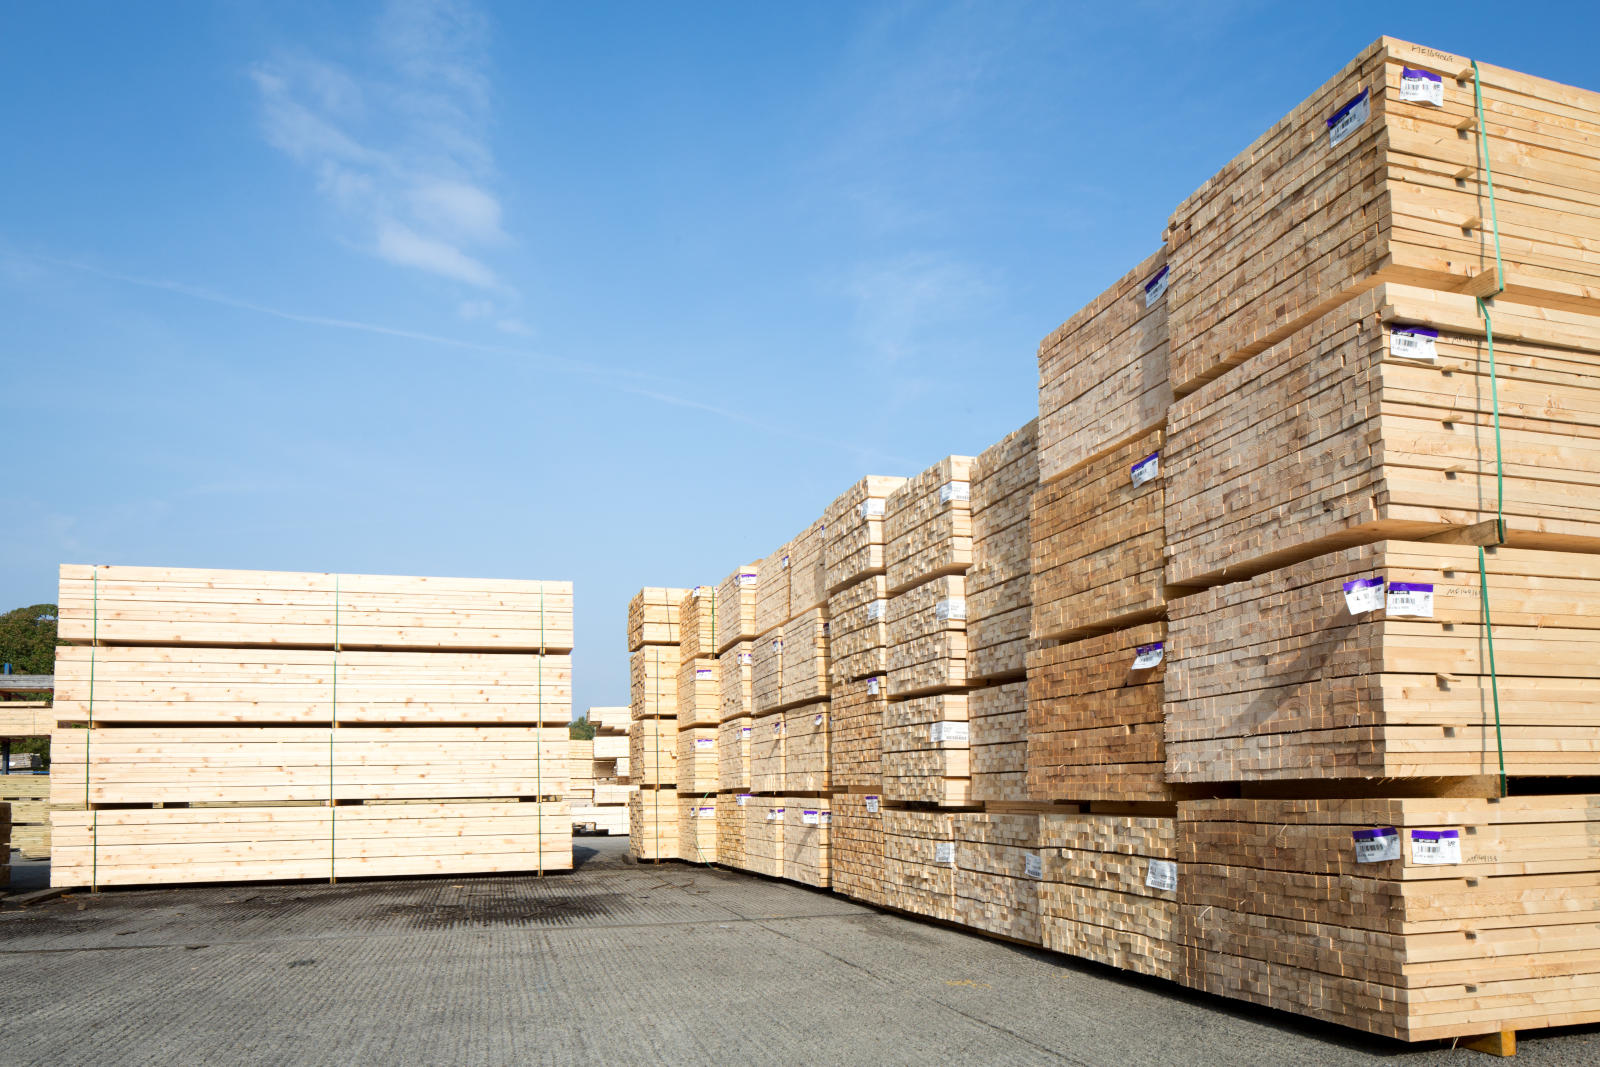 Neatly stacked wooden products sitting in a concrete yard